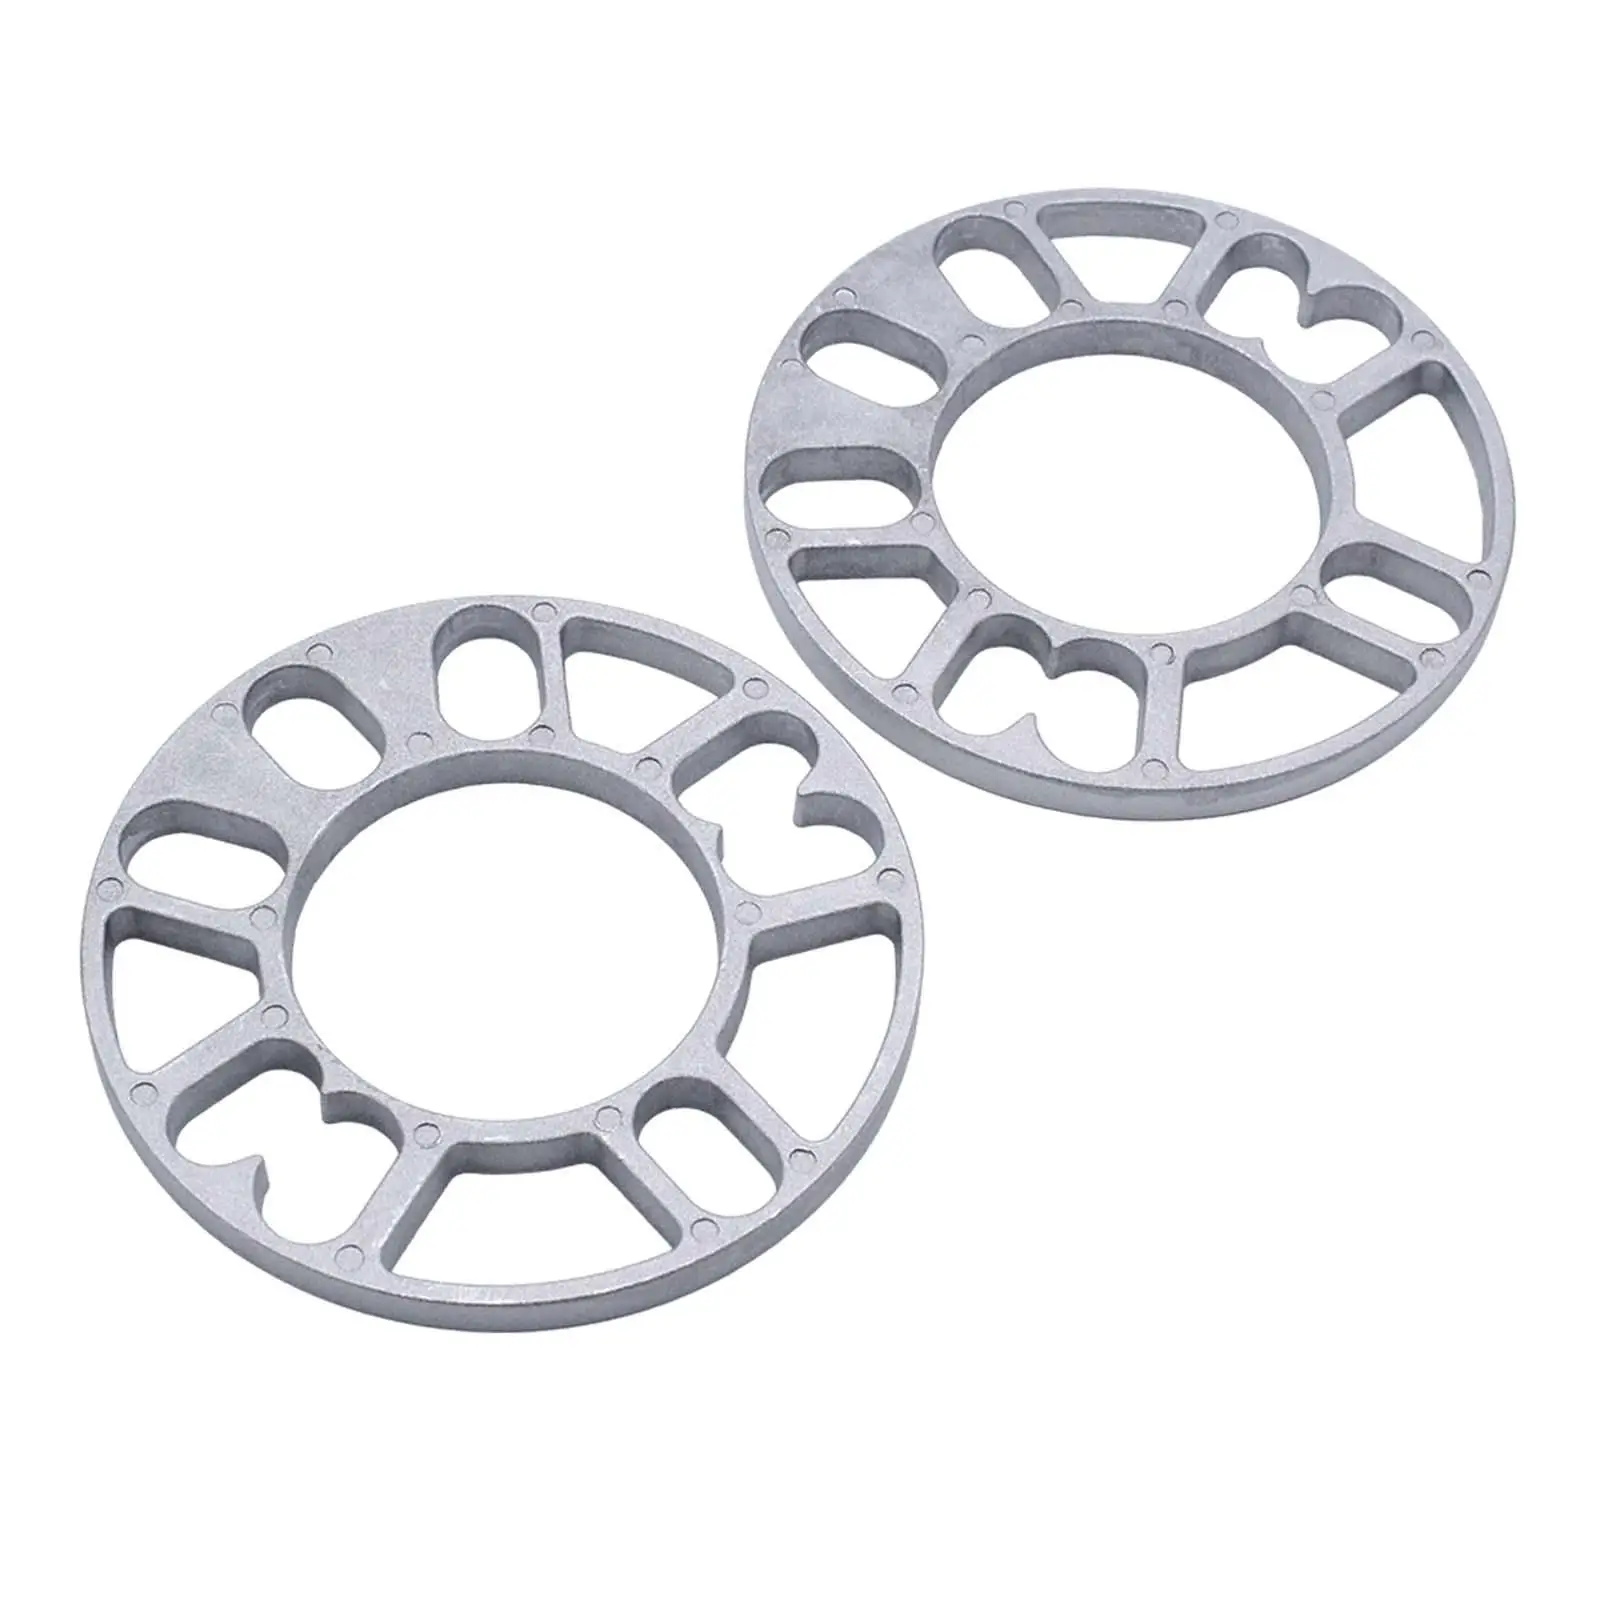 2Pcs Wheel Spacers Hub Spacer Shims Universal Accessories Aluminum Alloy for